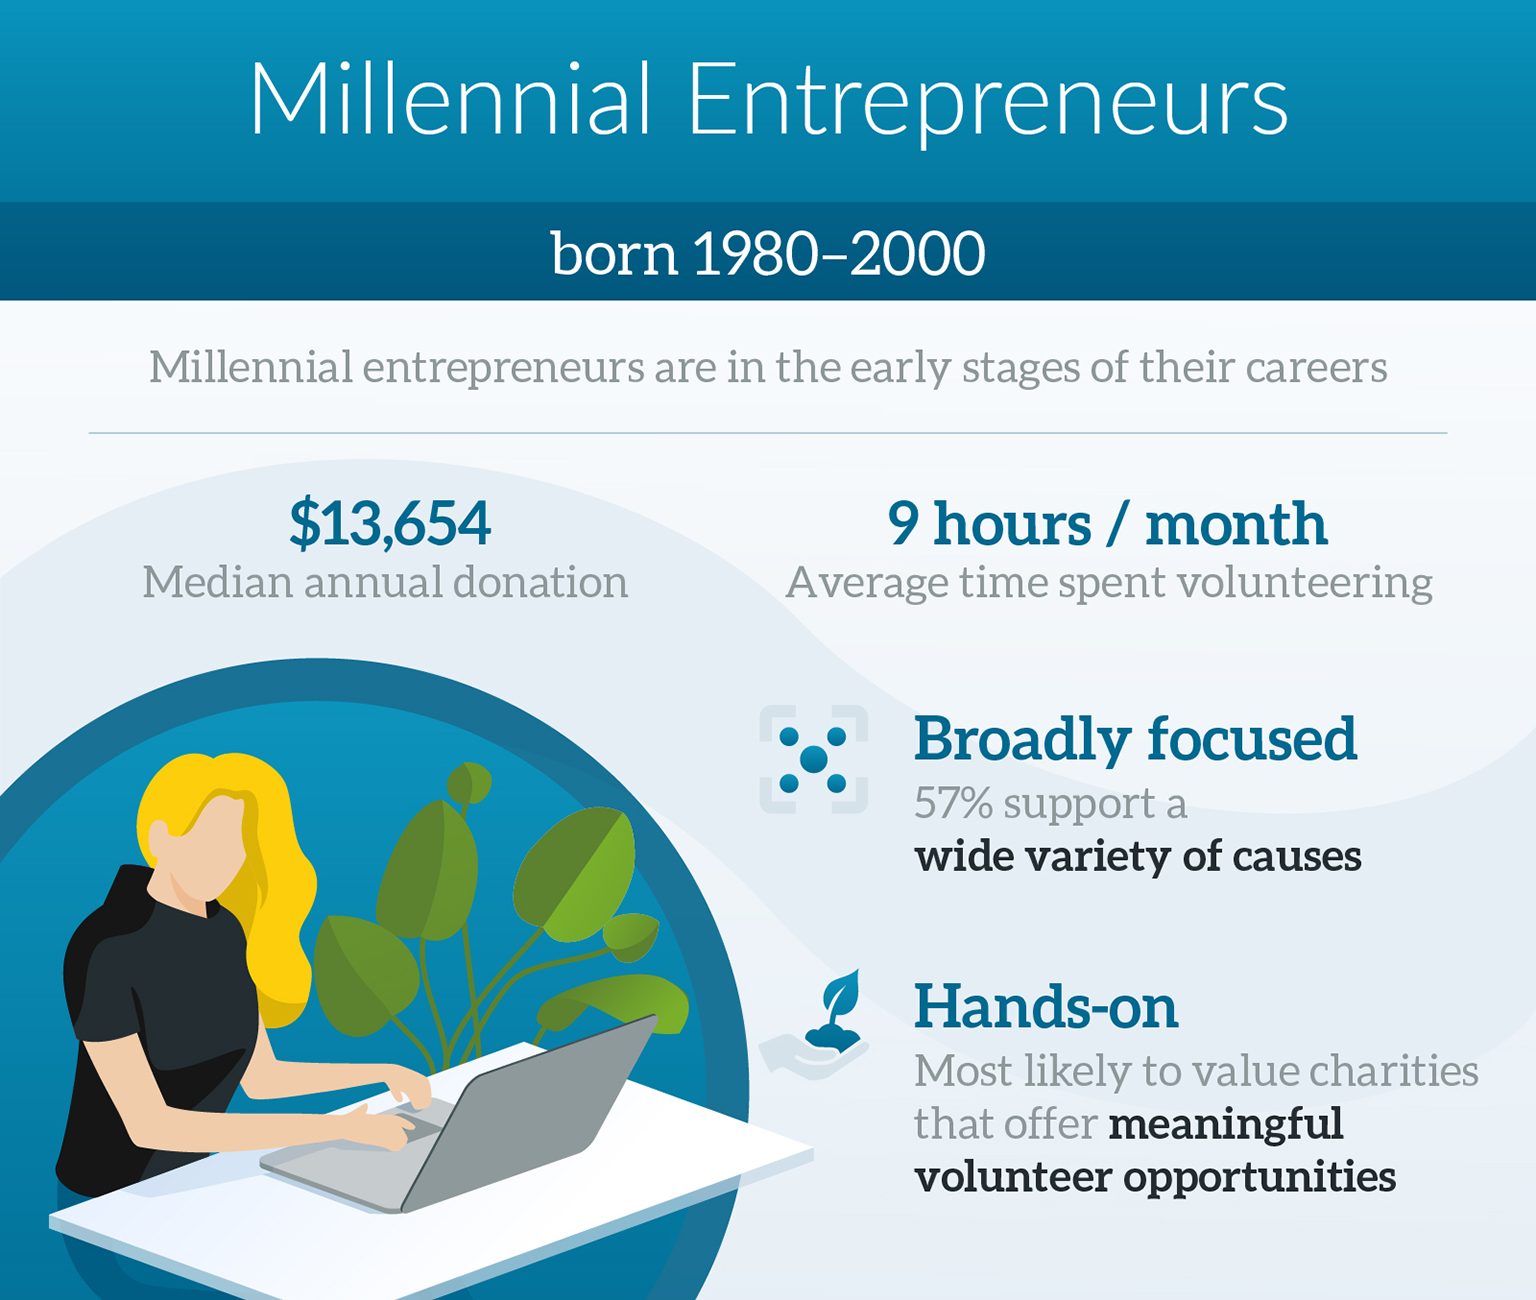 Graphic describing millennial entrepreneurs and how they approach philanthropy. They are hands-on and support a wide variety of causes.